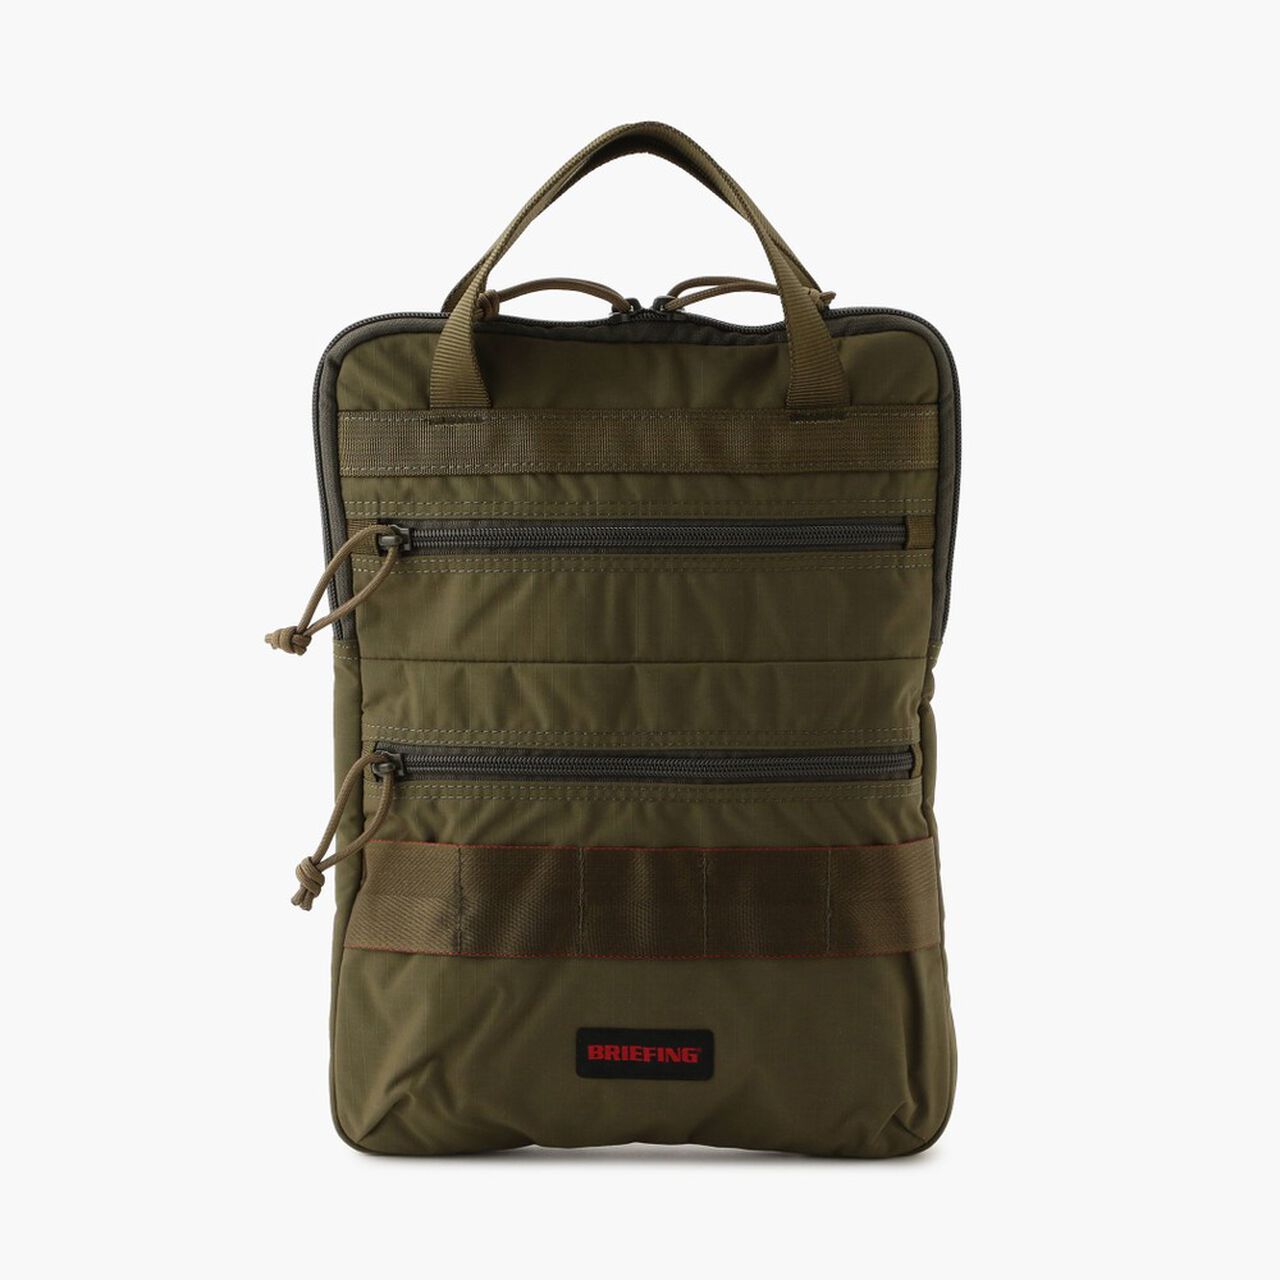 PC BRIEF TOTE MW,Olive, large image number 0